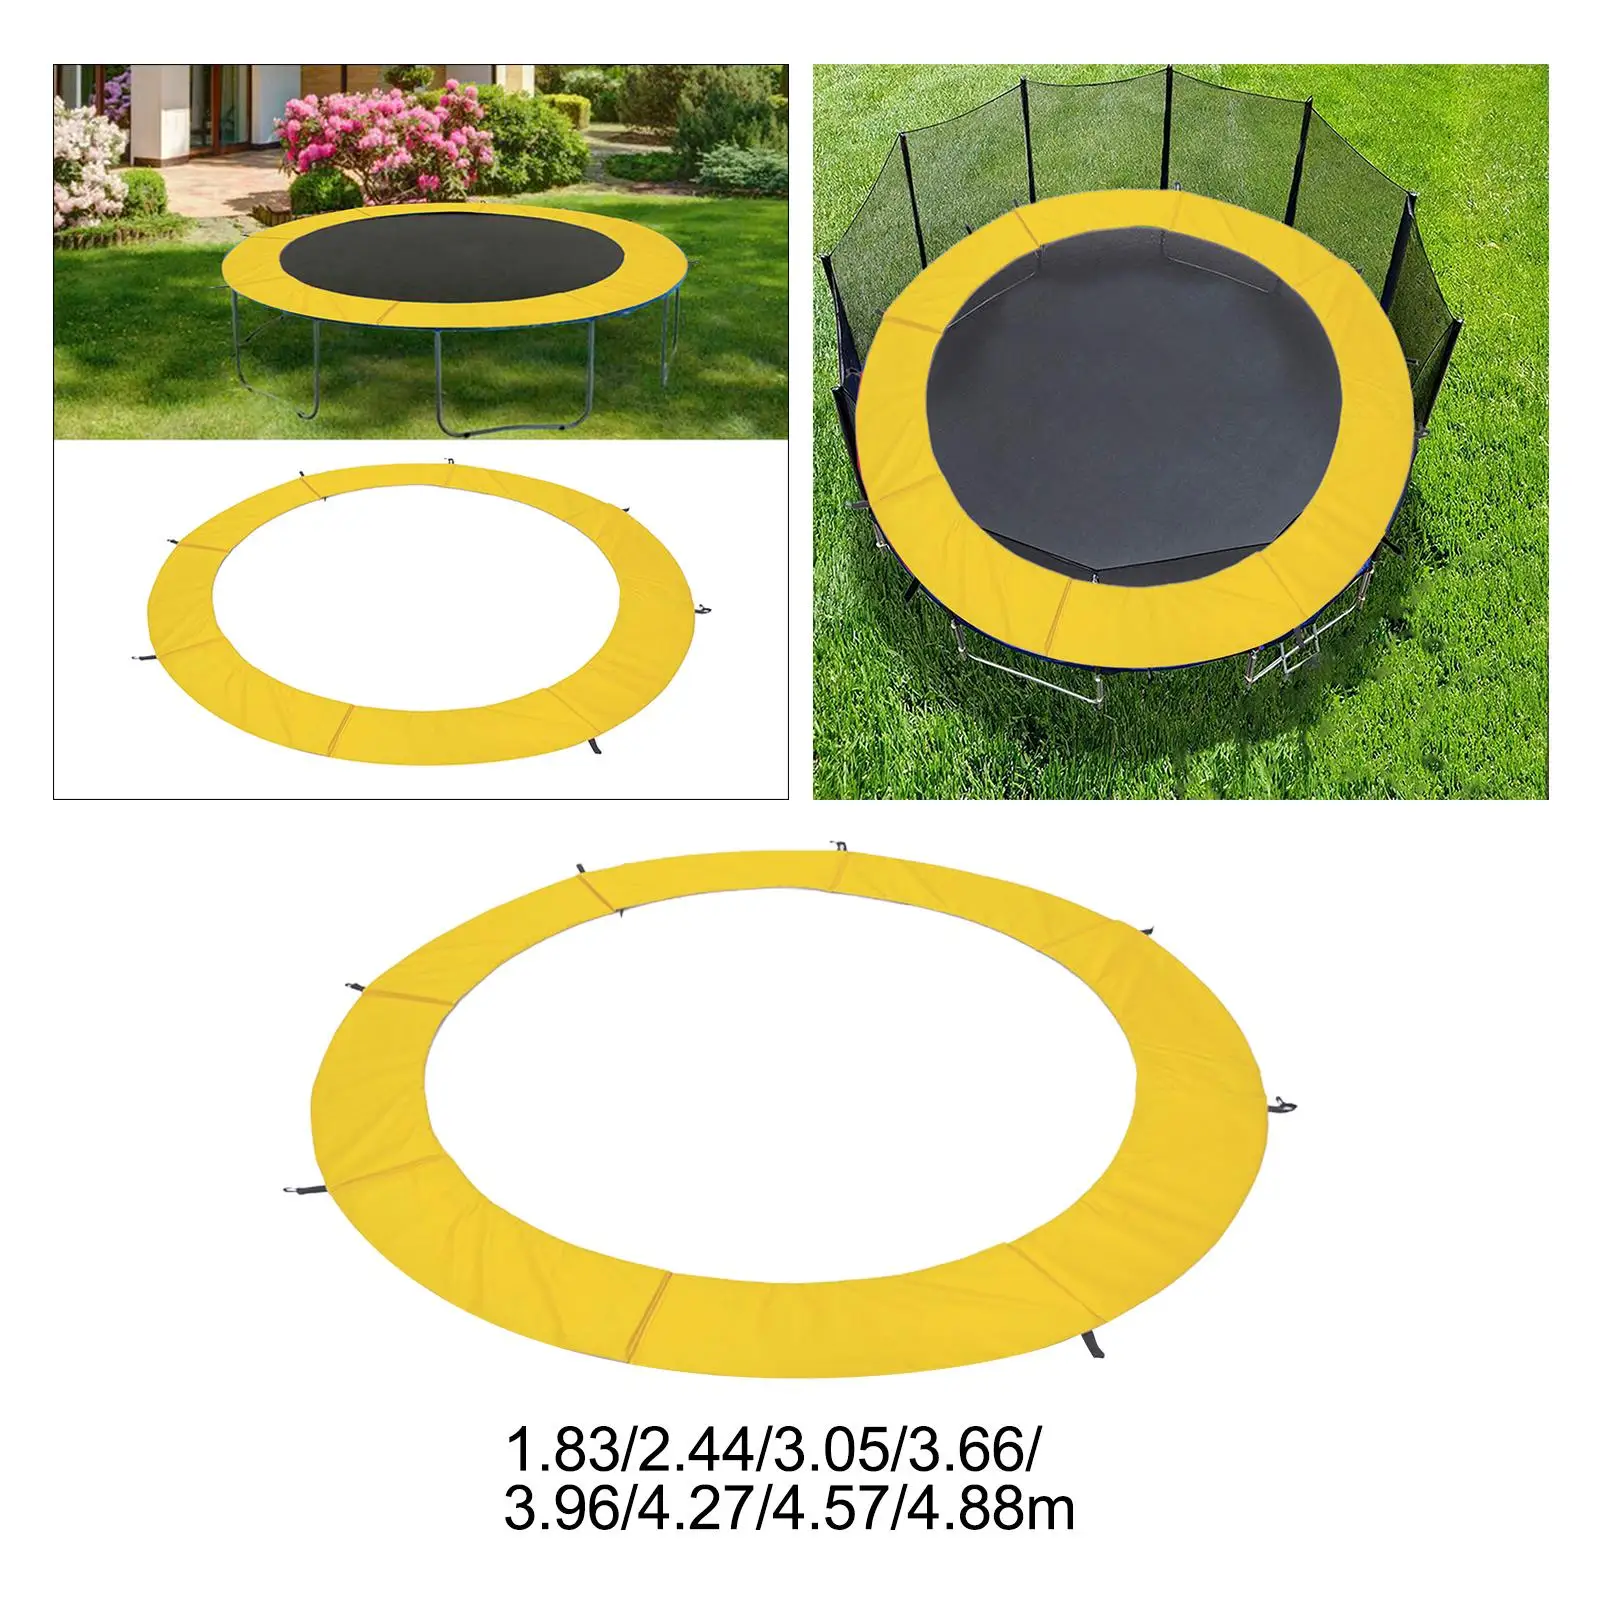 Trampoline Pad Cover Jumping Bed Cover Waterproof Tear Resistant Trampoline Protective Cover Replacement Safety Pad